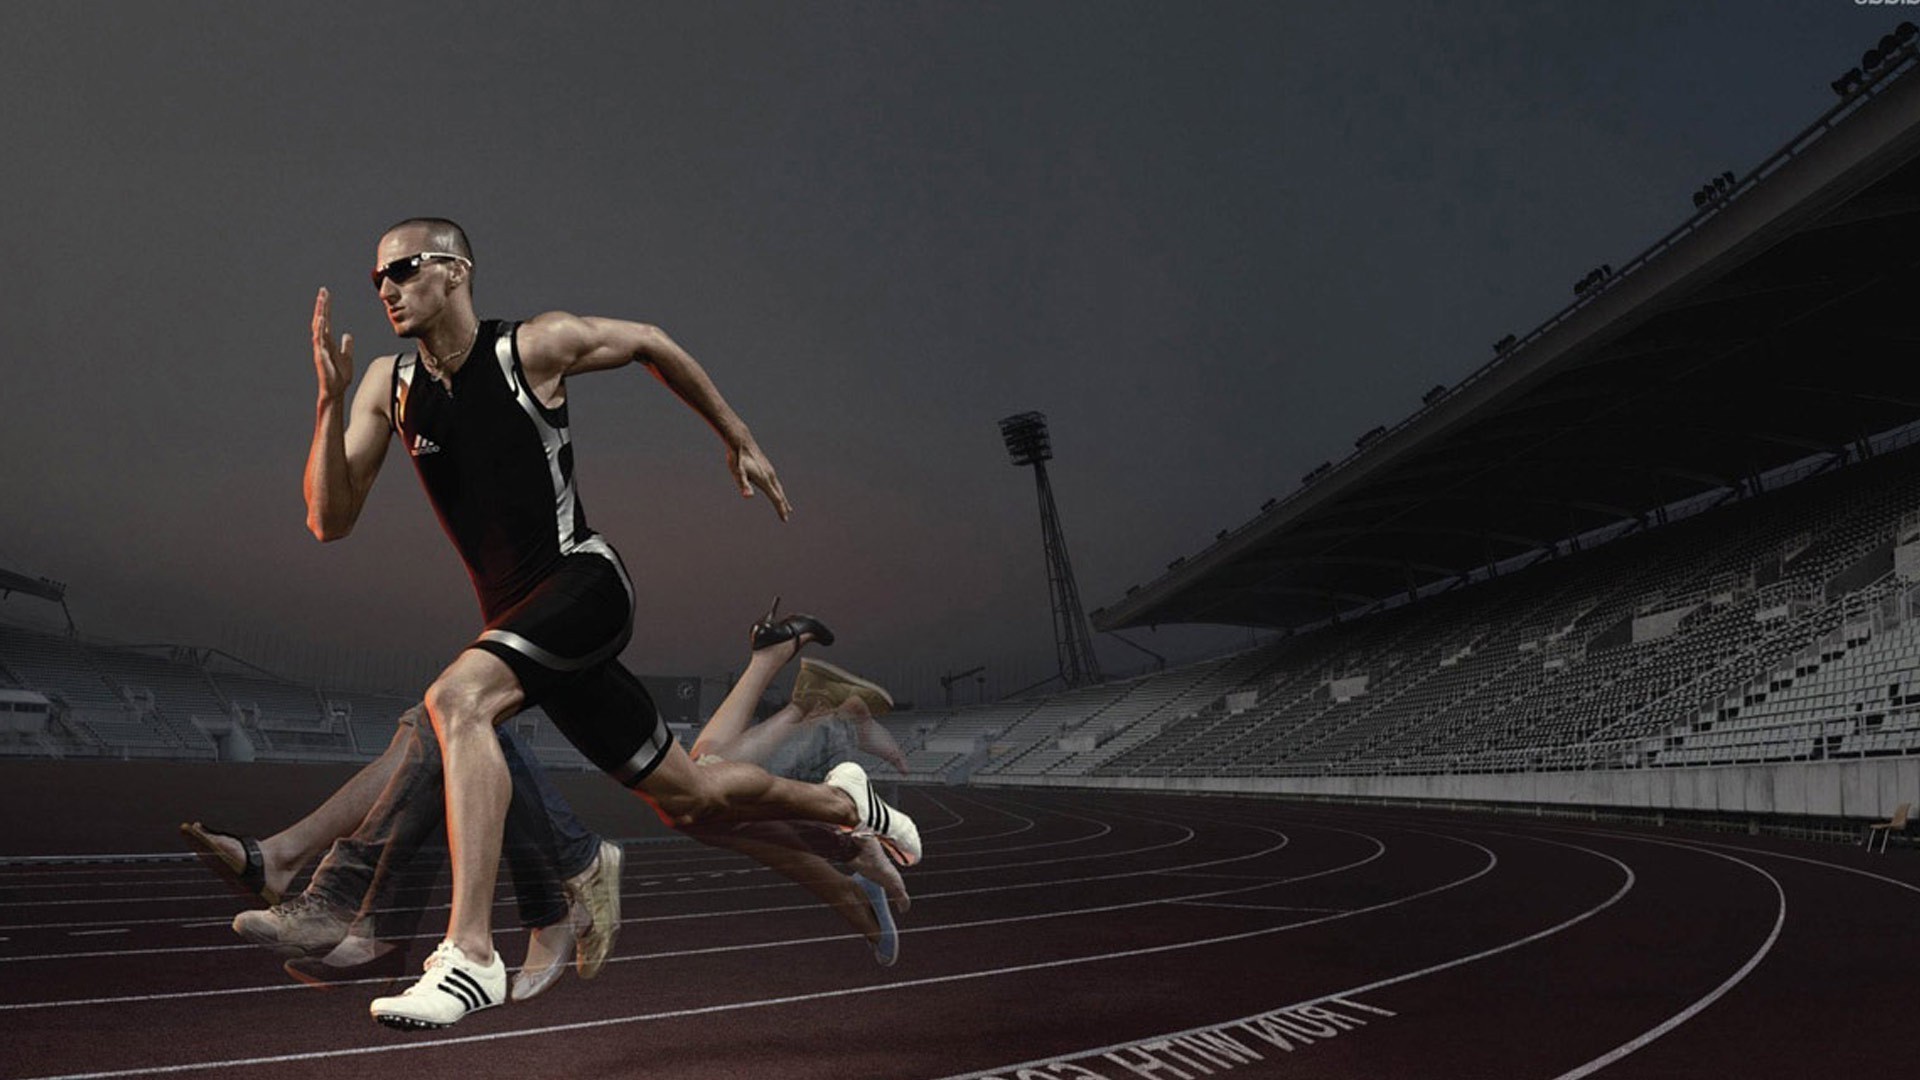 1920x1080 Dancer, Track and Field Athletics, Muscle, Jumping, Sport Venue Wallpaper  in 